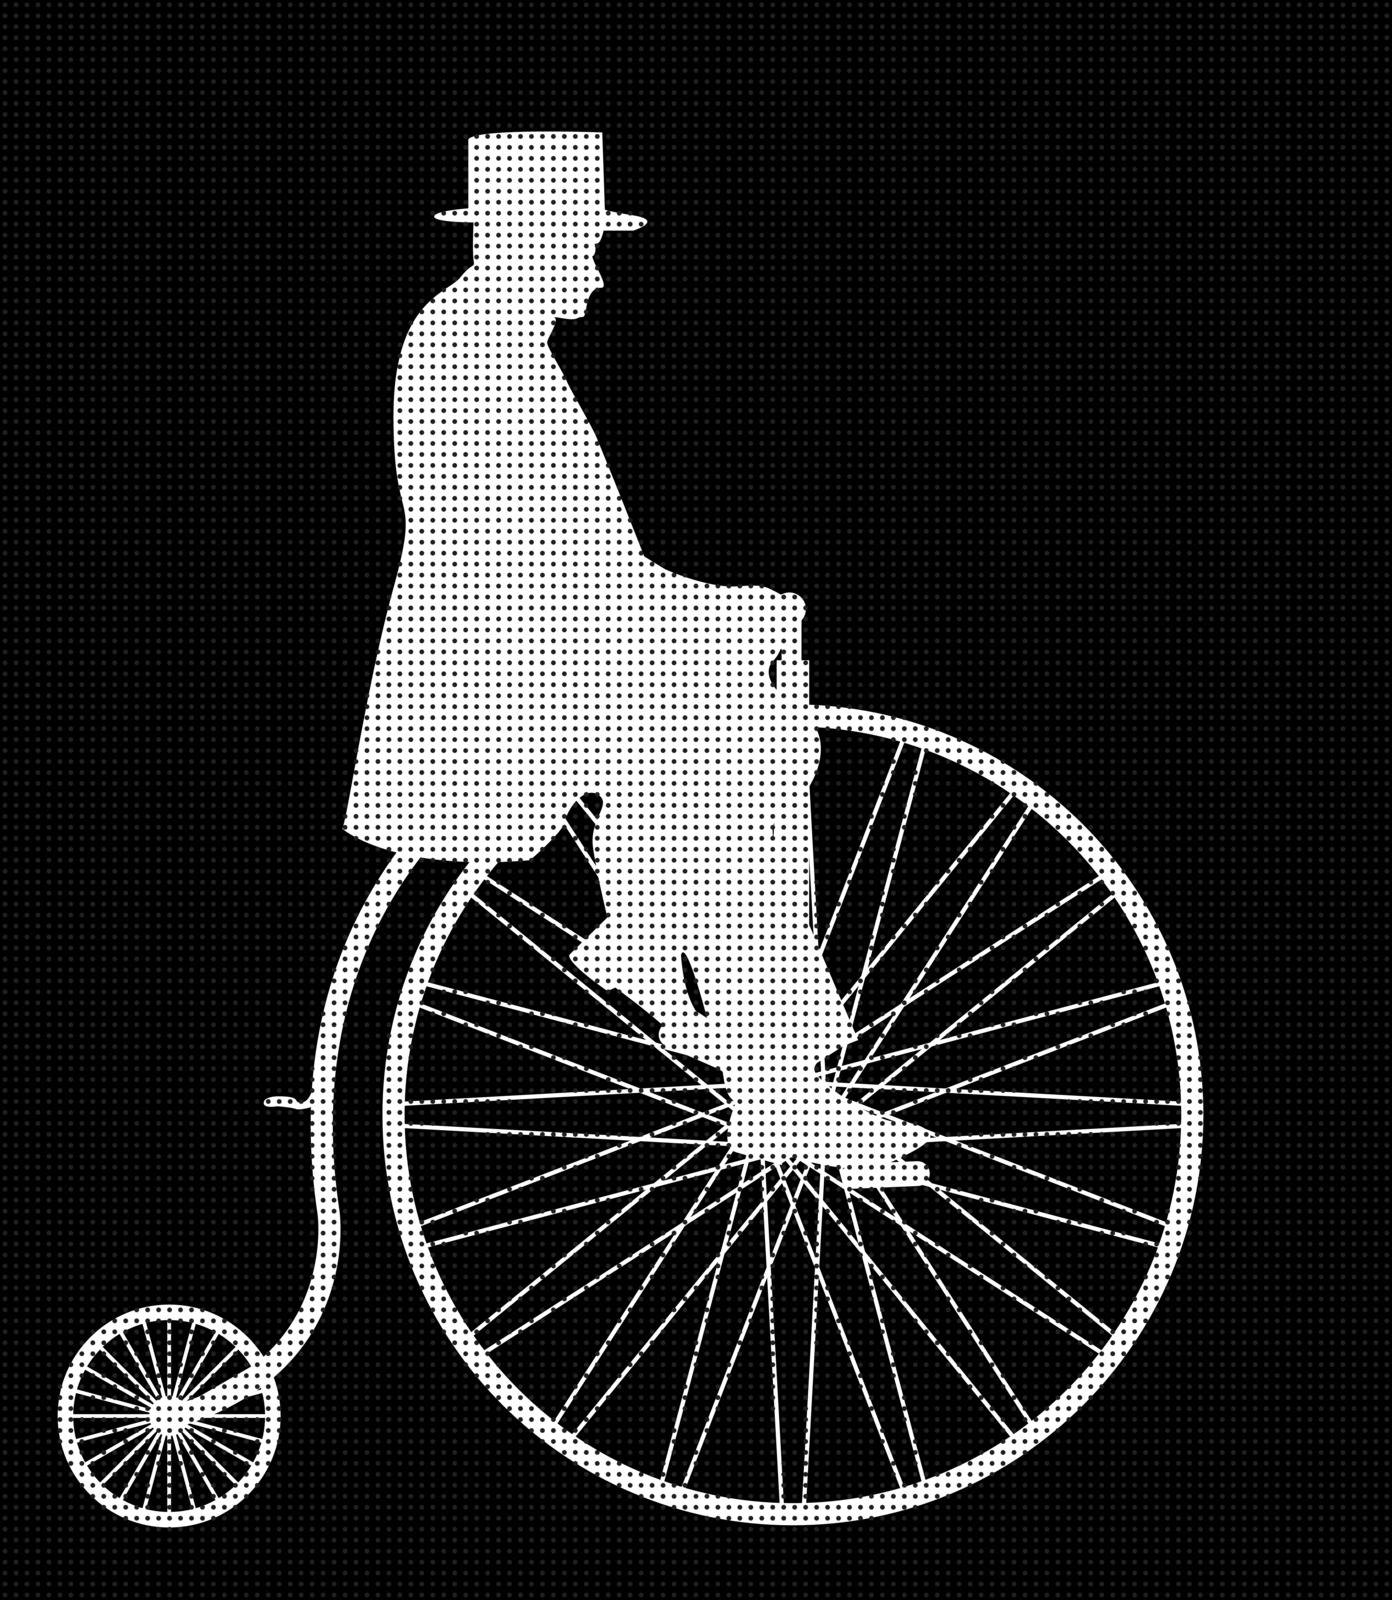 A retro penny farthing gentleman silhouette isolated on a black background